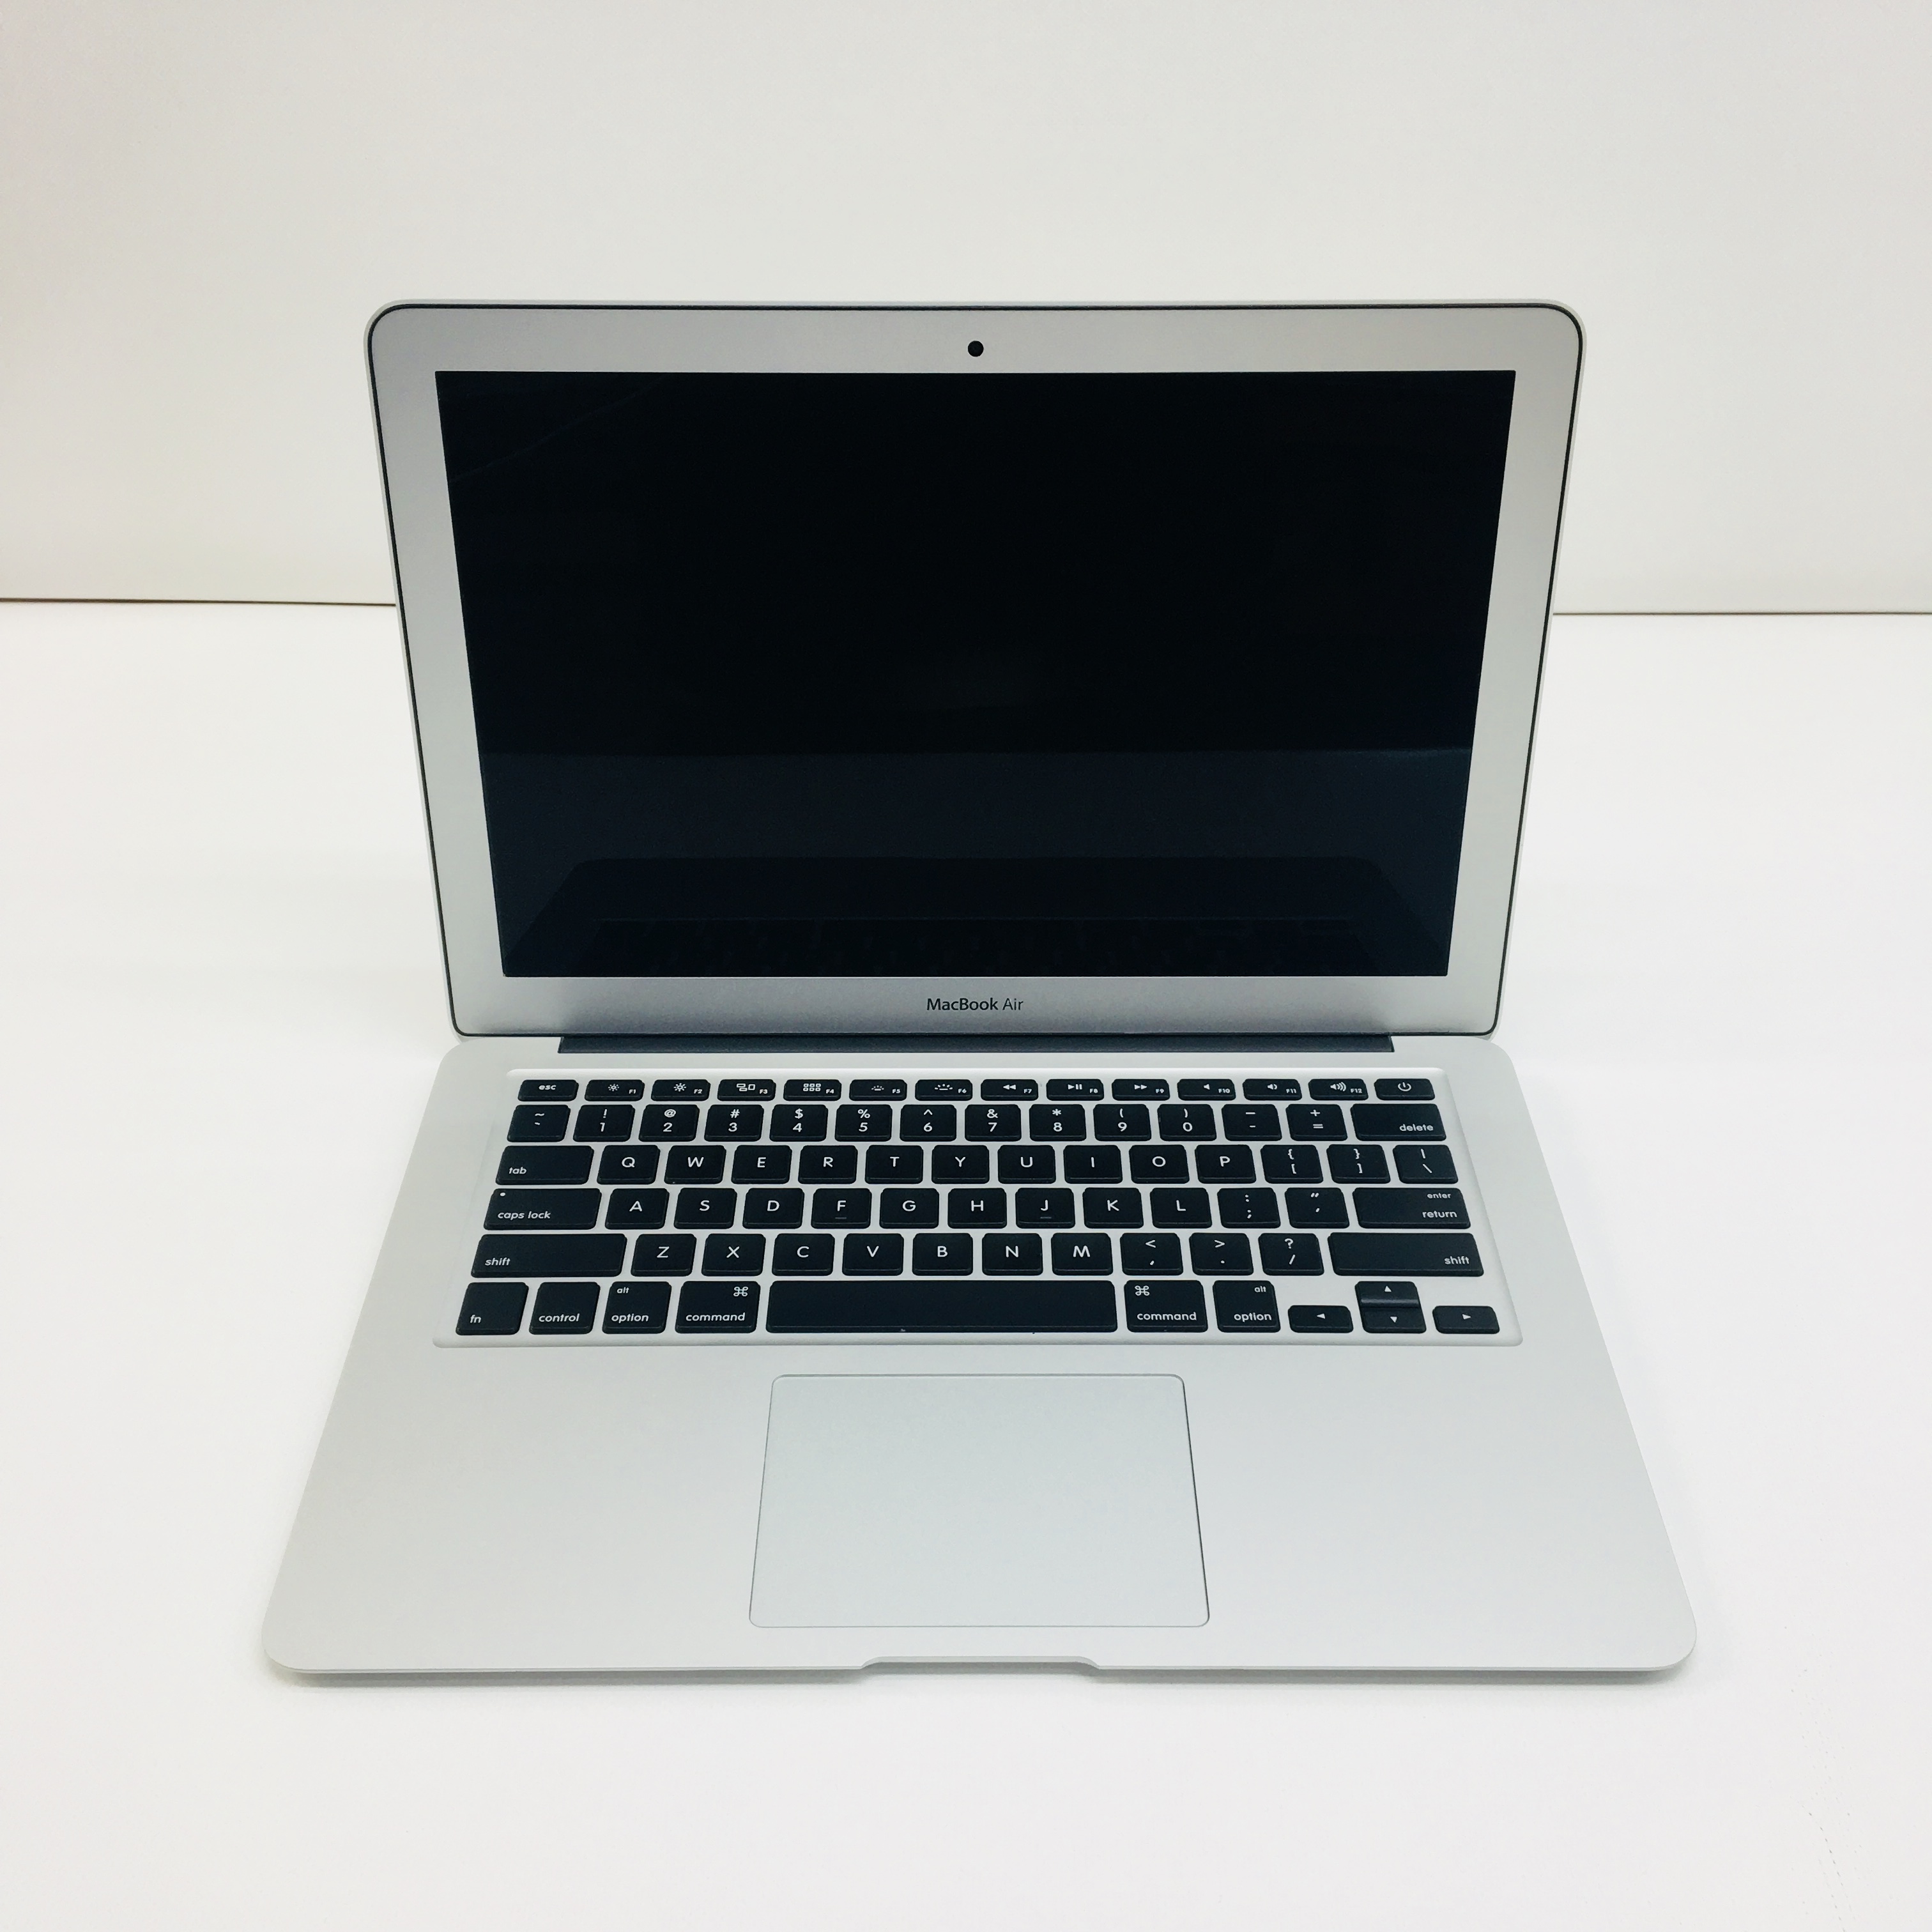 Fully Refurbished MacBook Air 13" Early 2015 INTEL CORE I5 1.6GHZ / 4GB